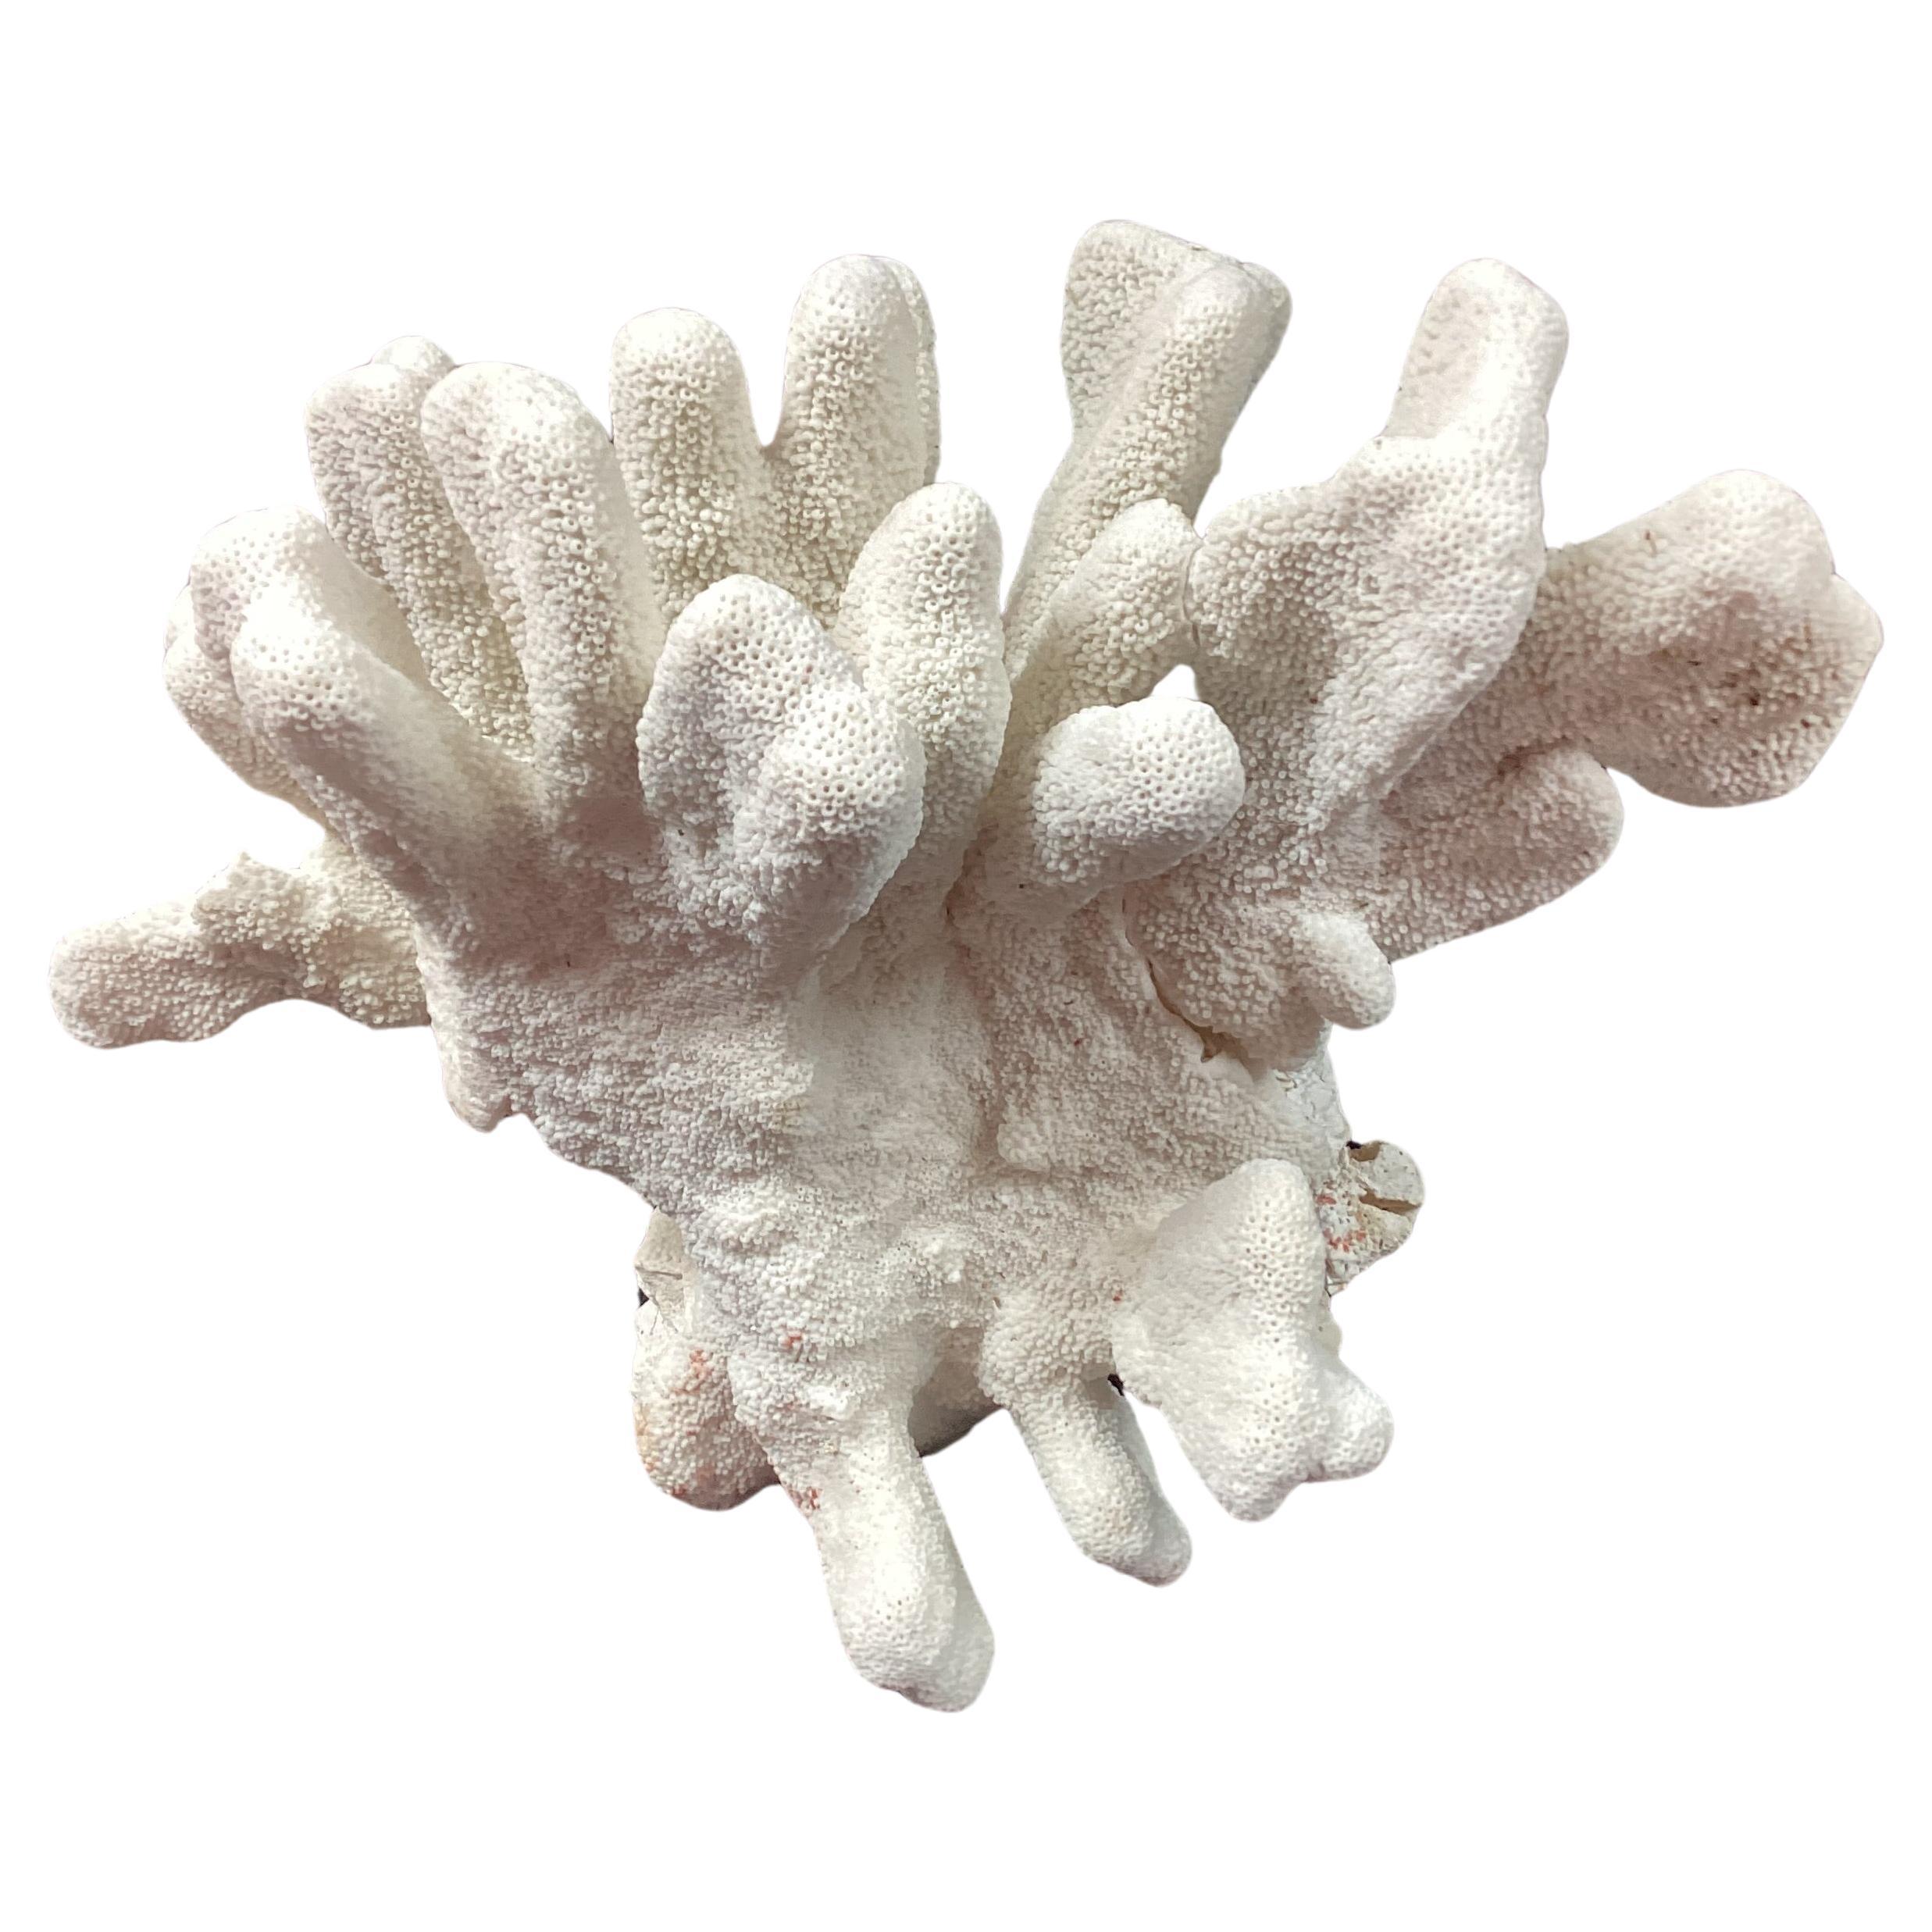 Organic Modern Natural White Coral Reef Specimen     #5 For Sale